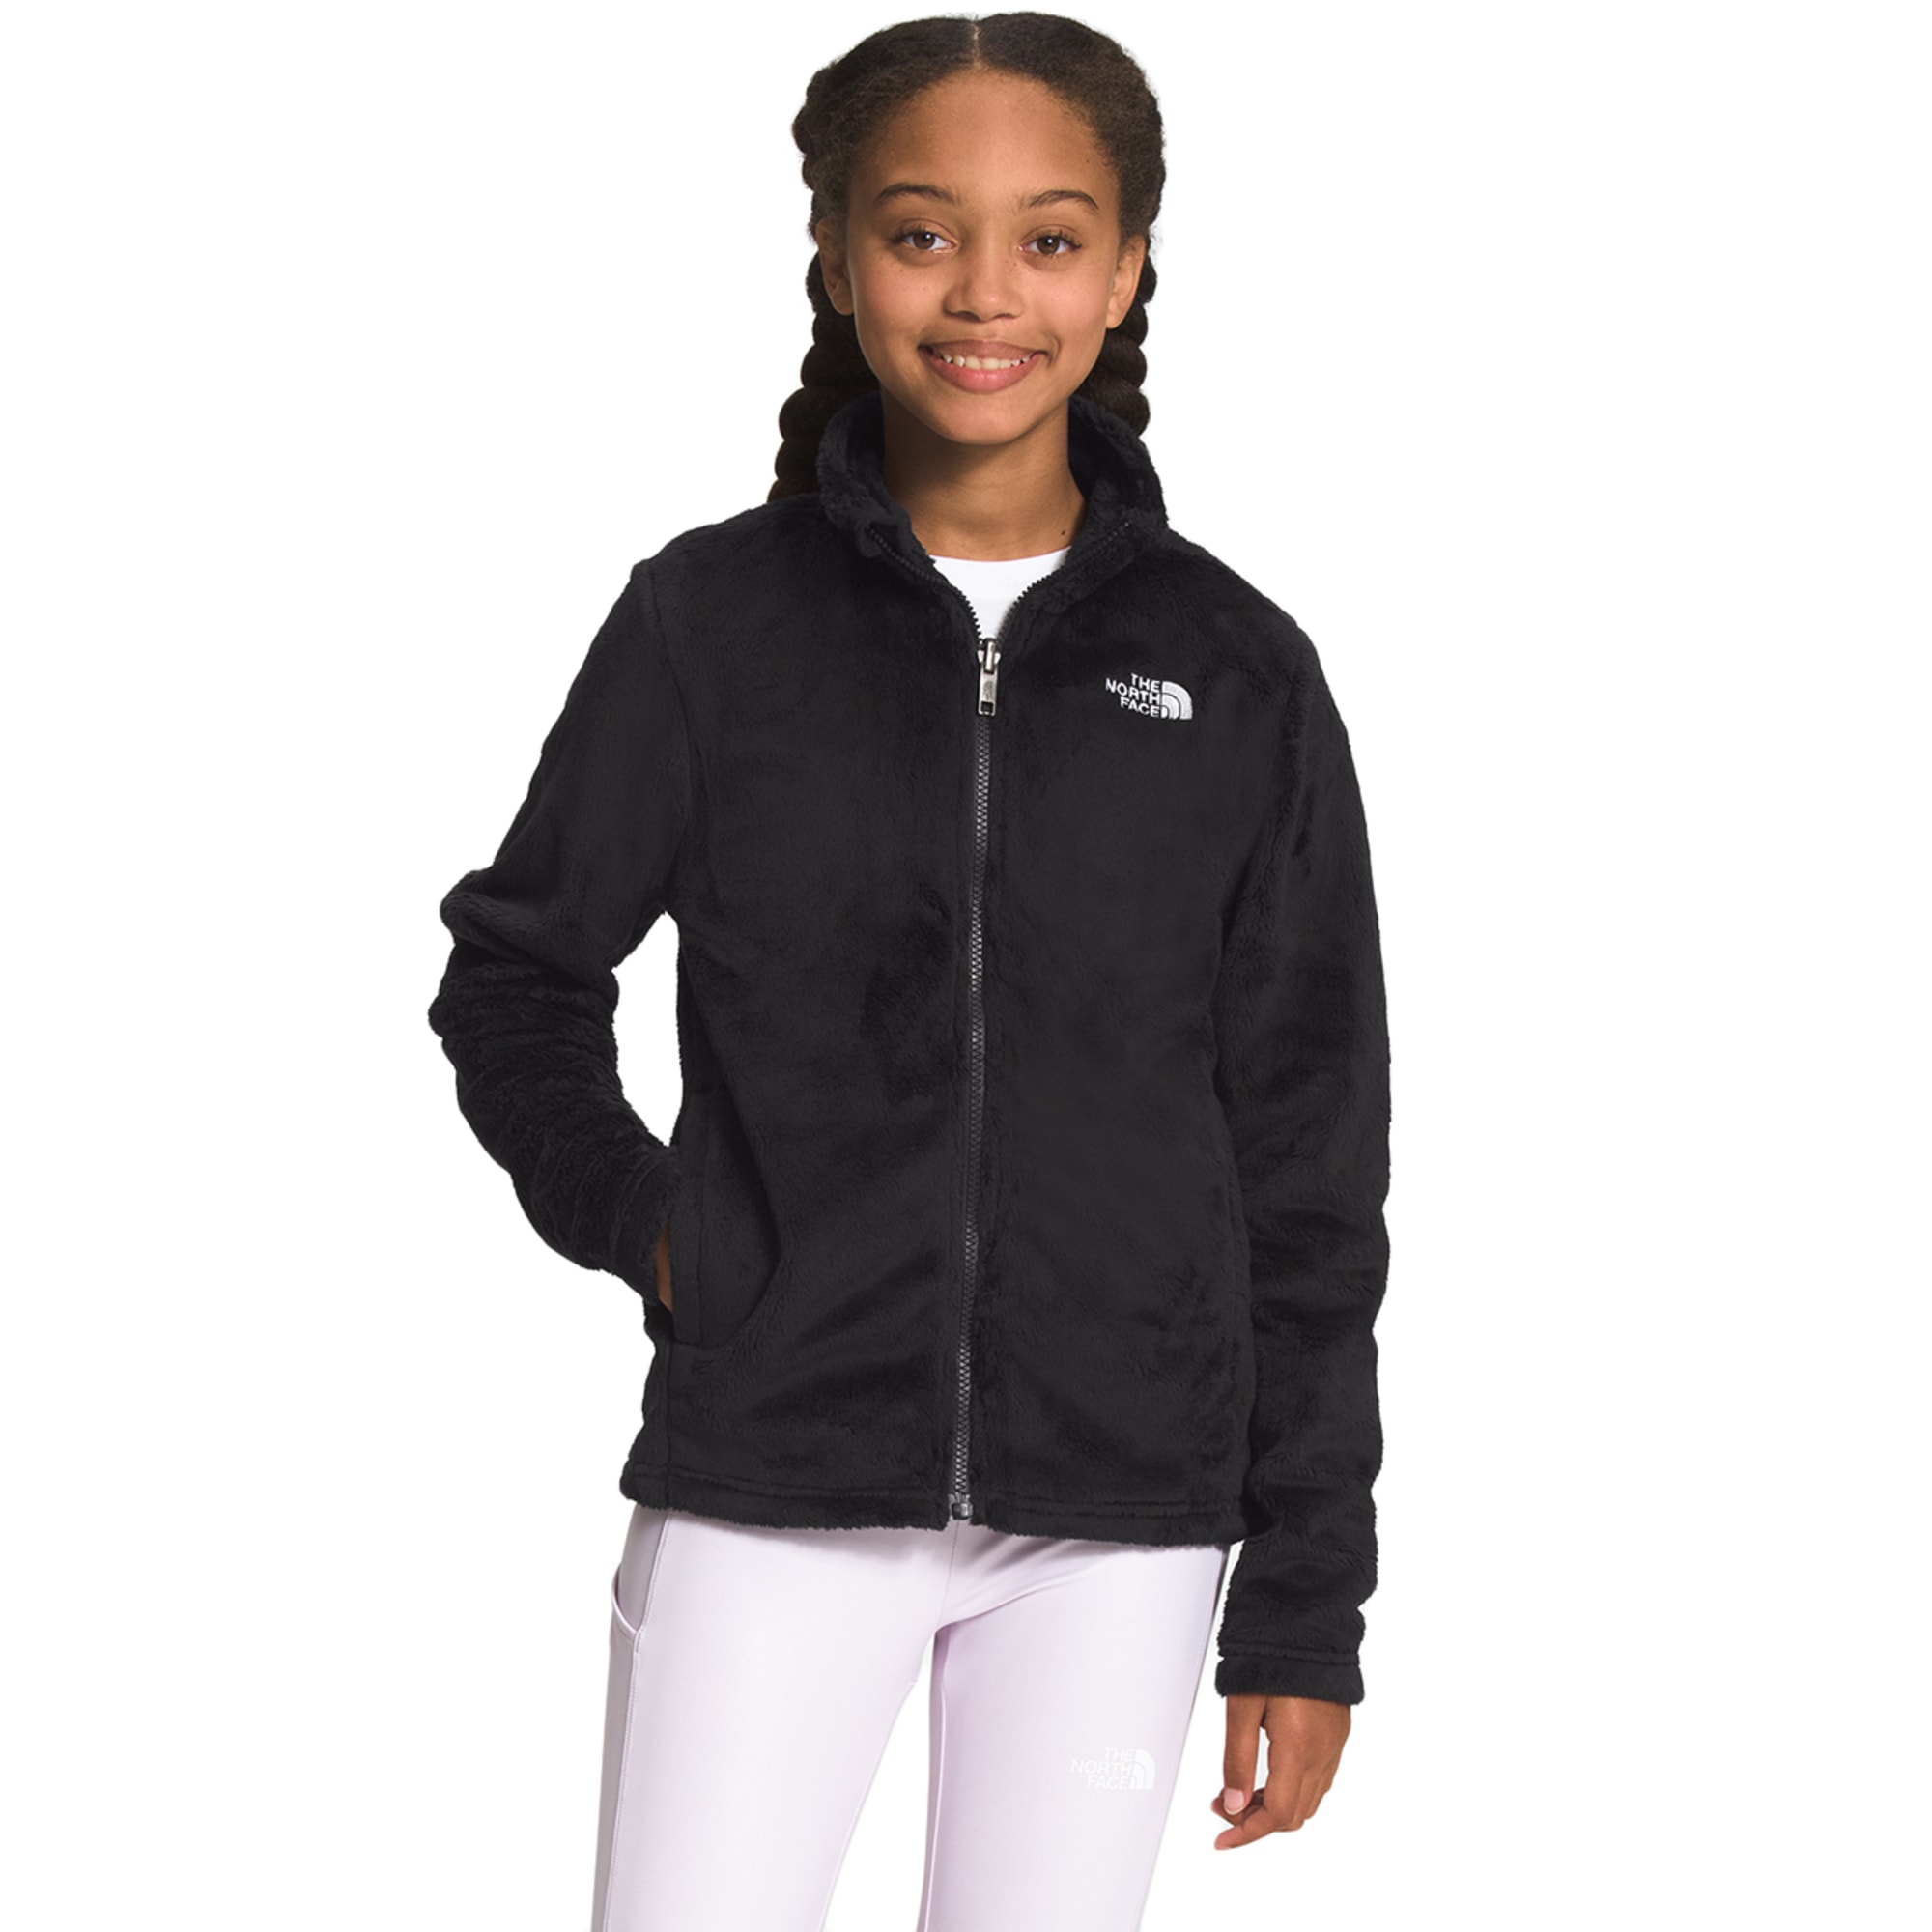 THE NORTH FACE Girls' Osolita Full-Zip Jacket - Eastern Mountain Sports